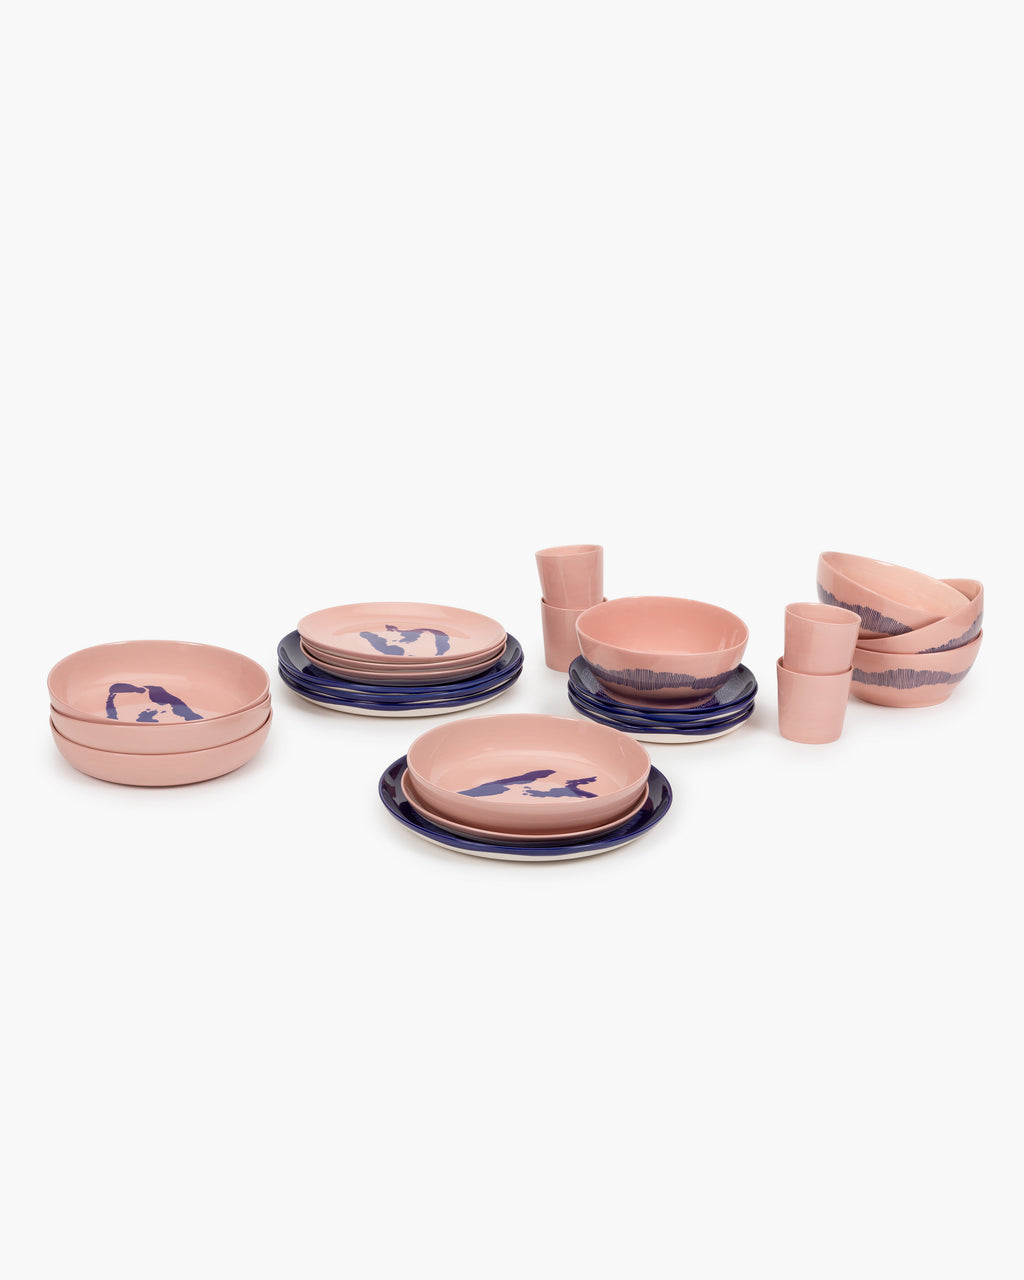 Full Set 24 pieces pink Feast